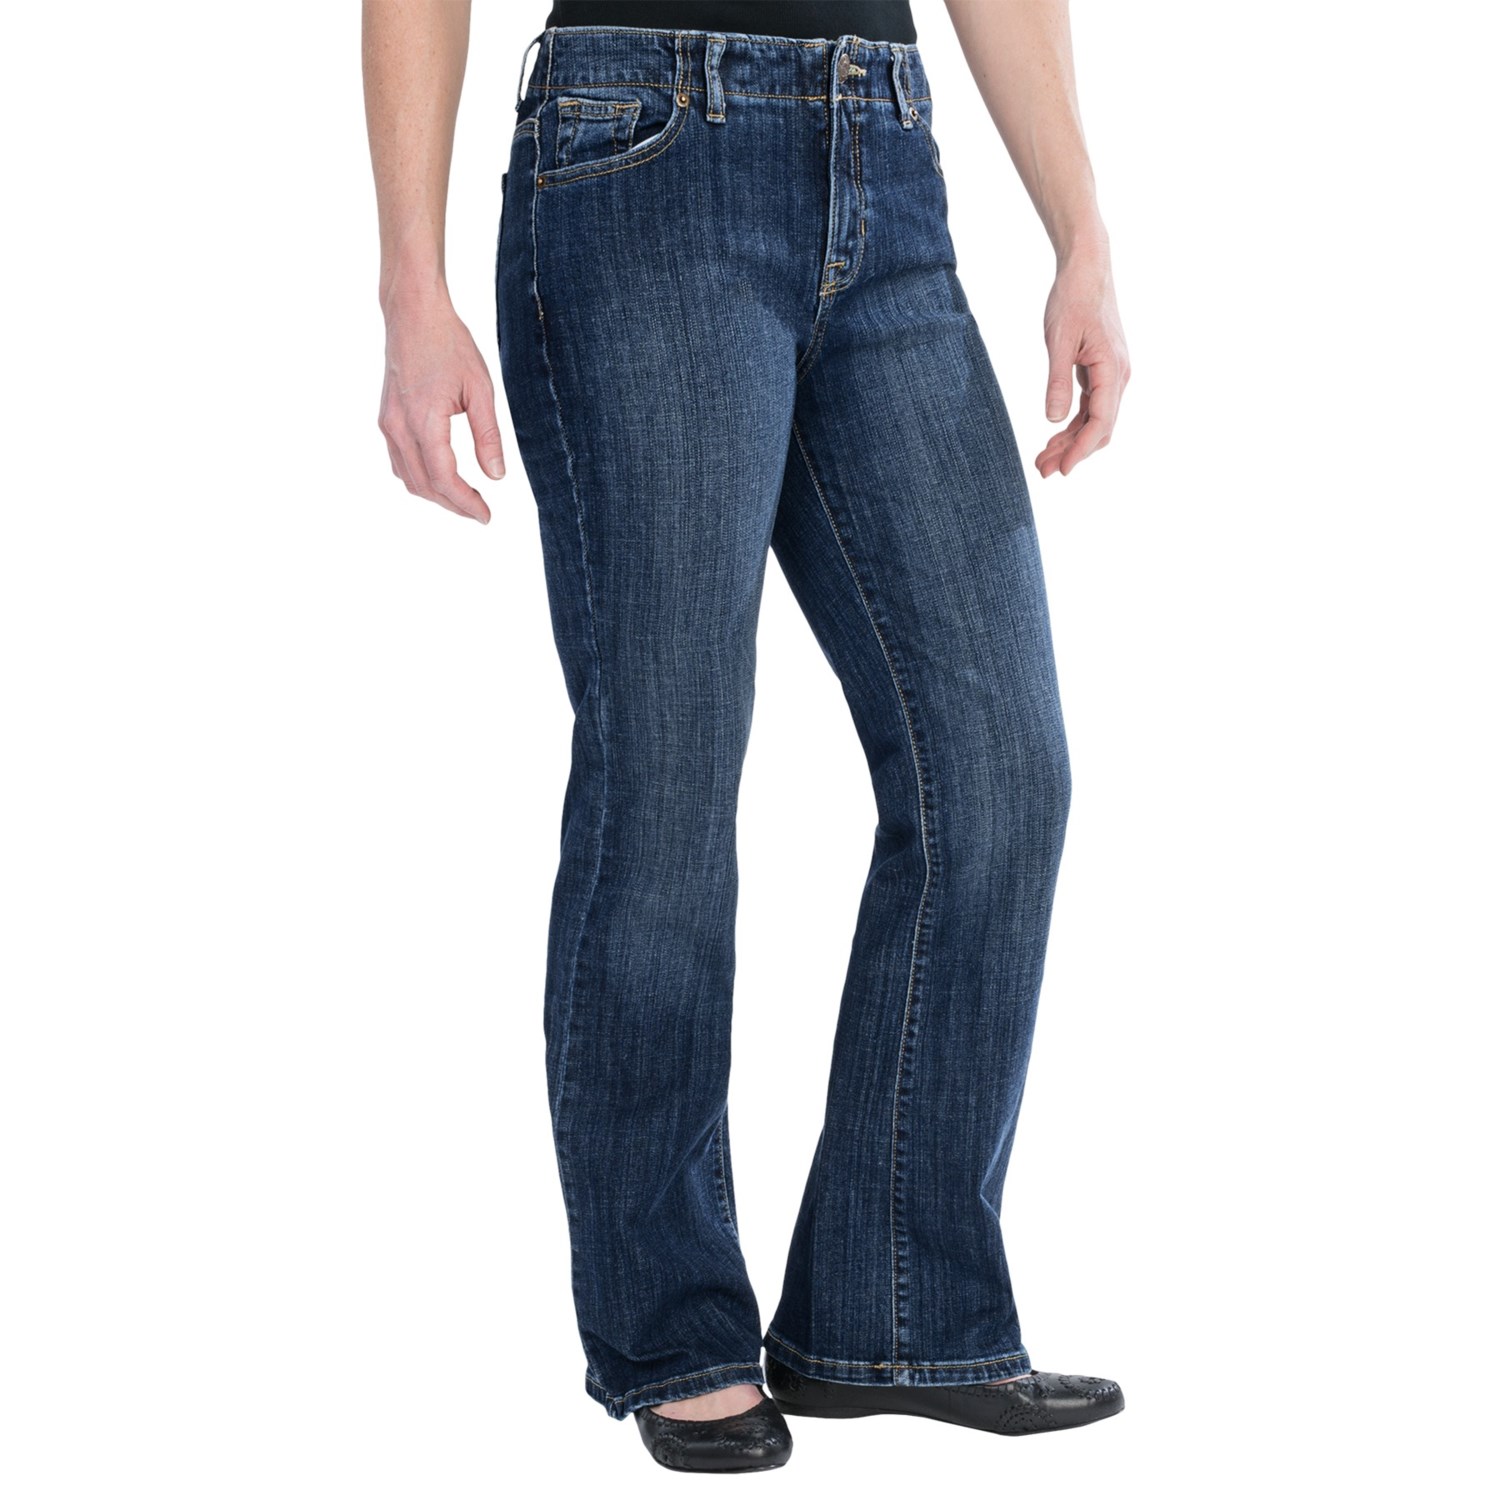 Washed Denim Bootcut Jeans - Classic Fit (For Plus Size Women) - Save 67%